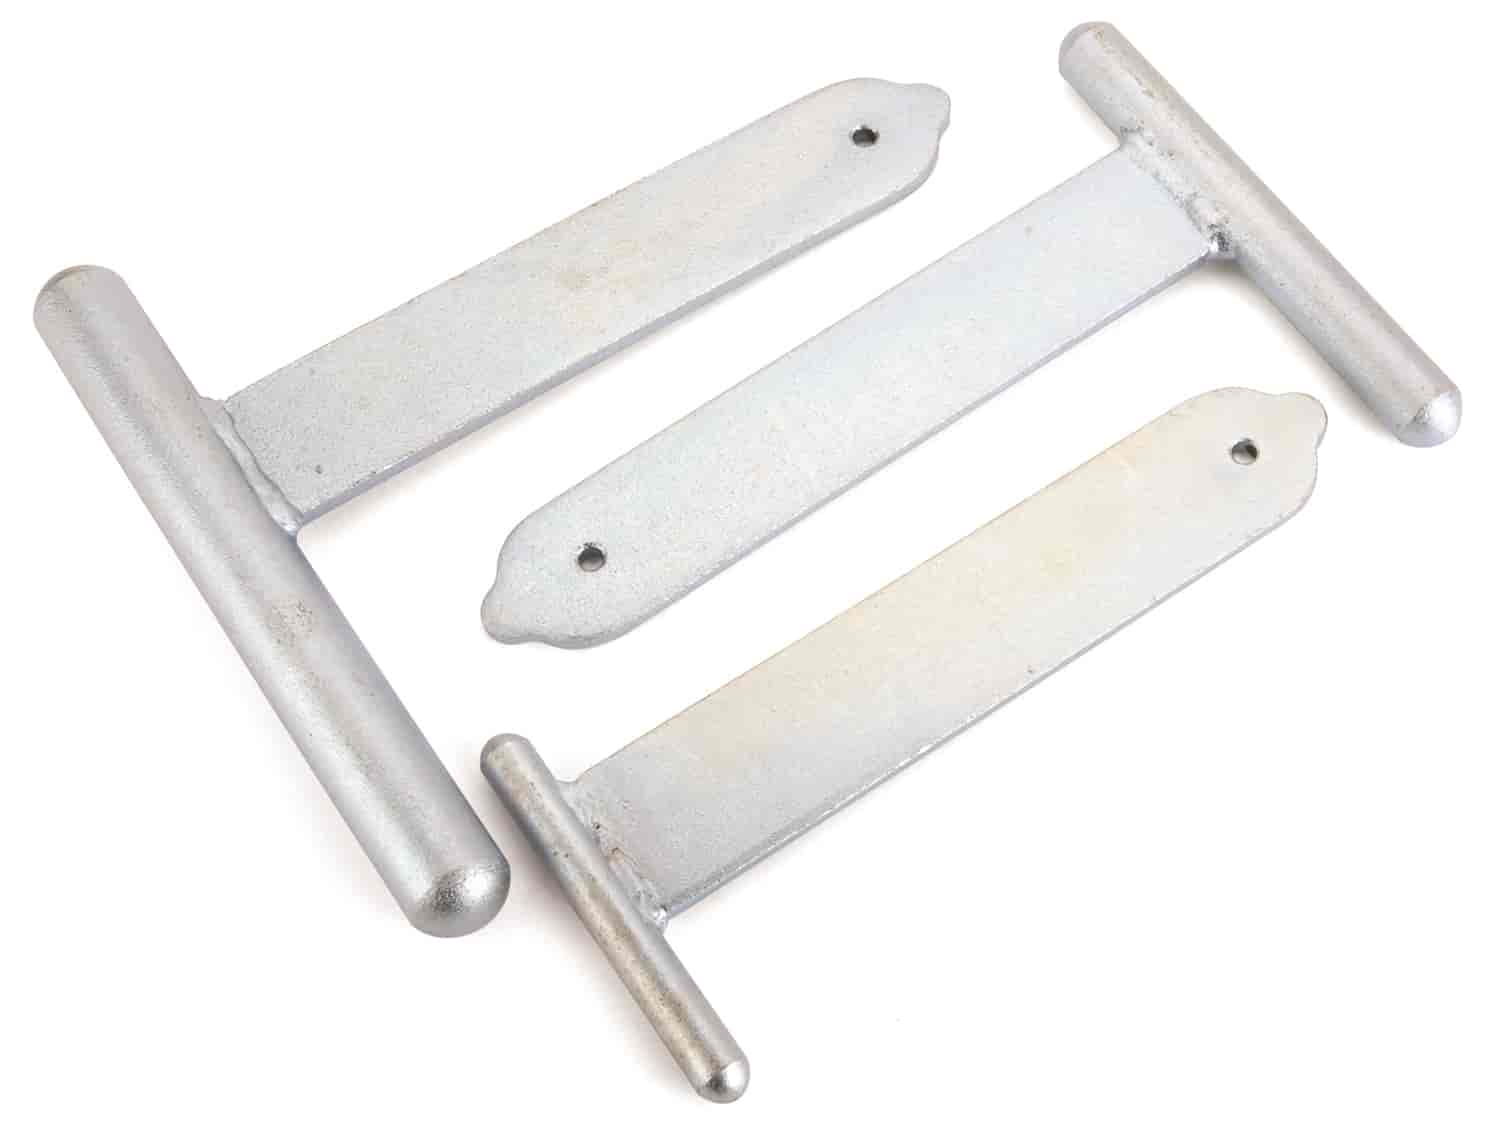 "T" Dolly Set Extra Long Offset Handle